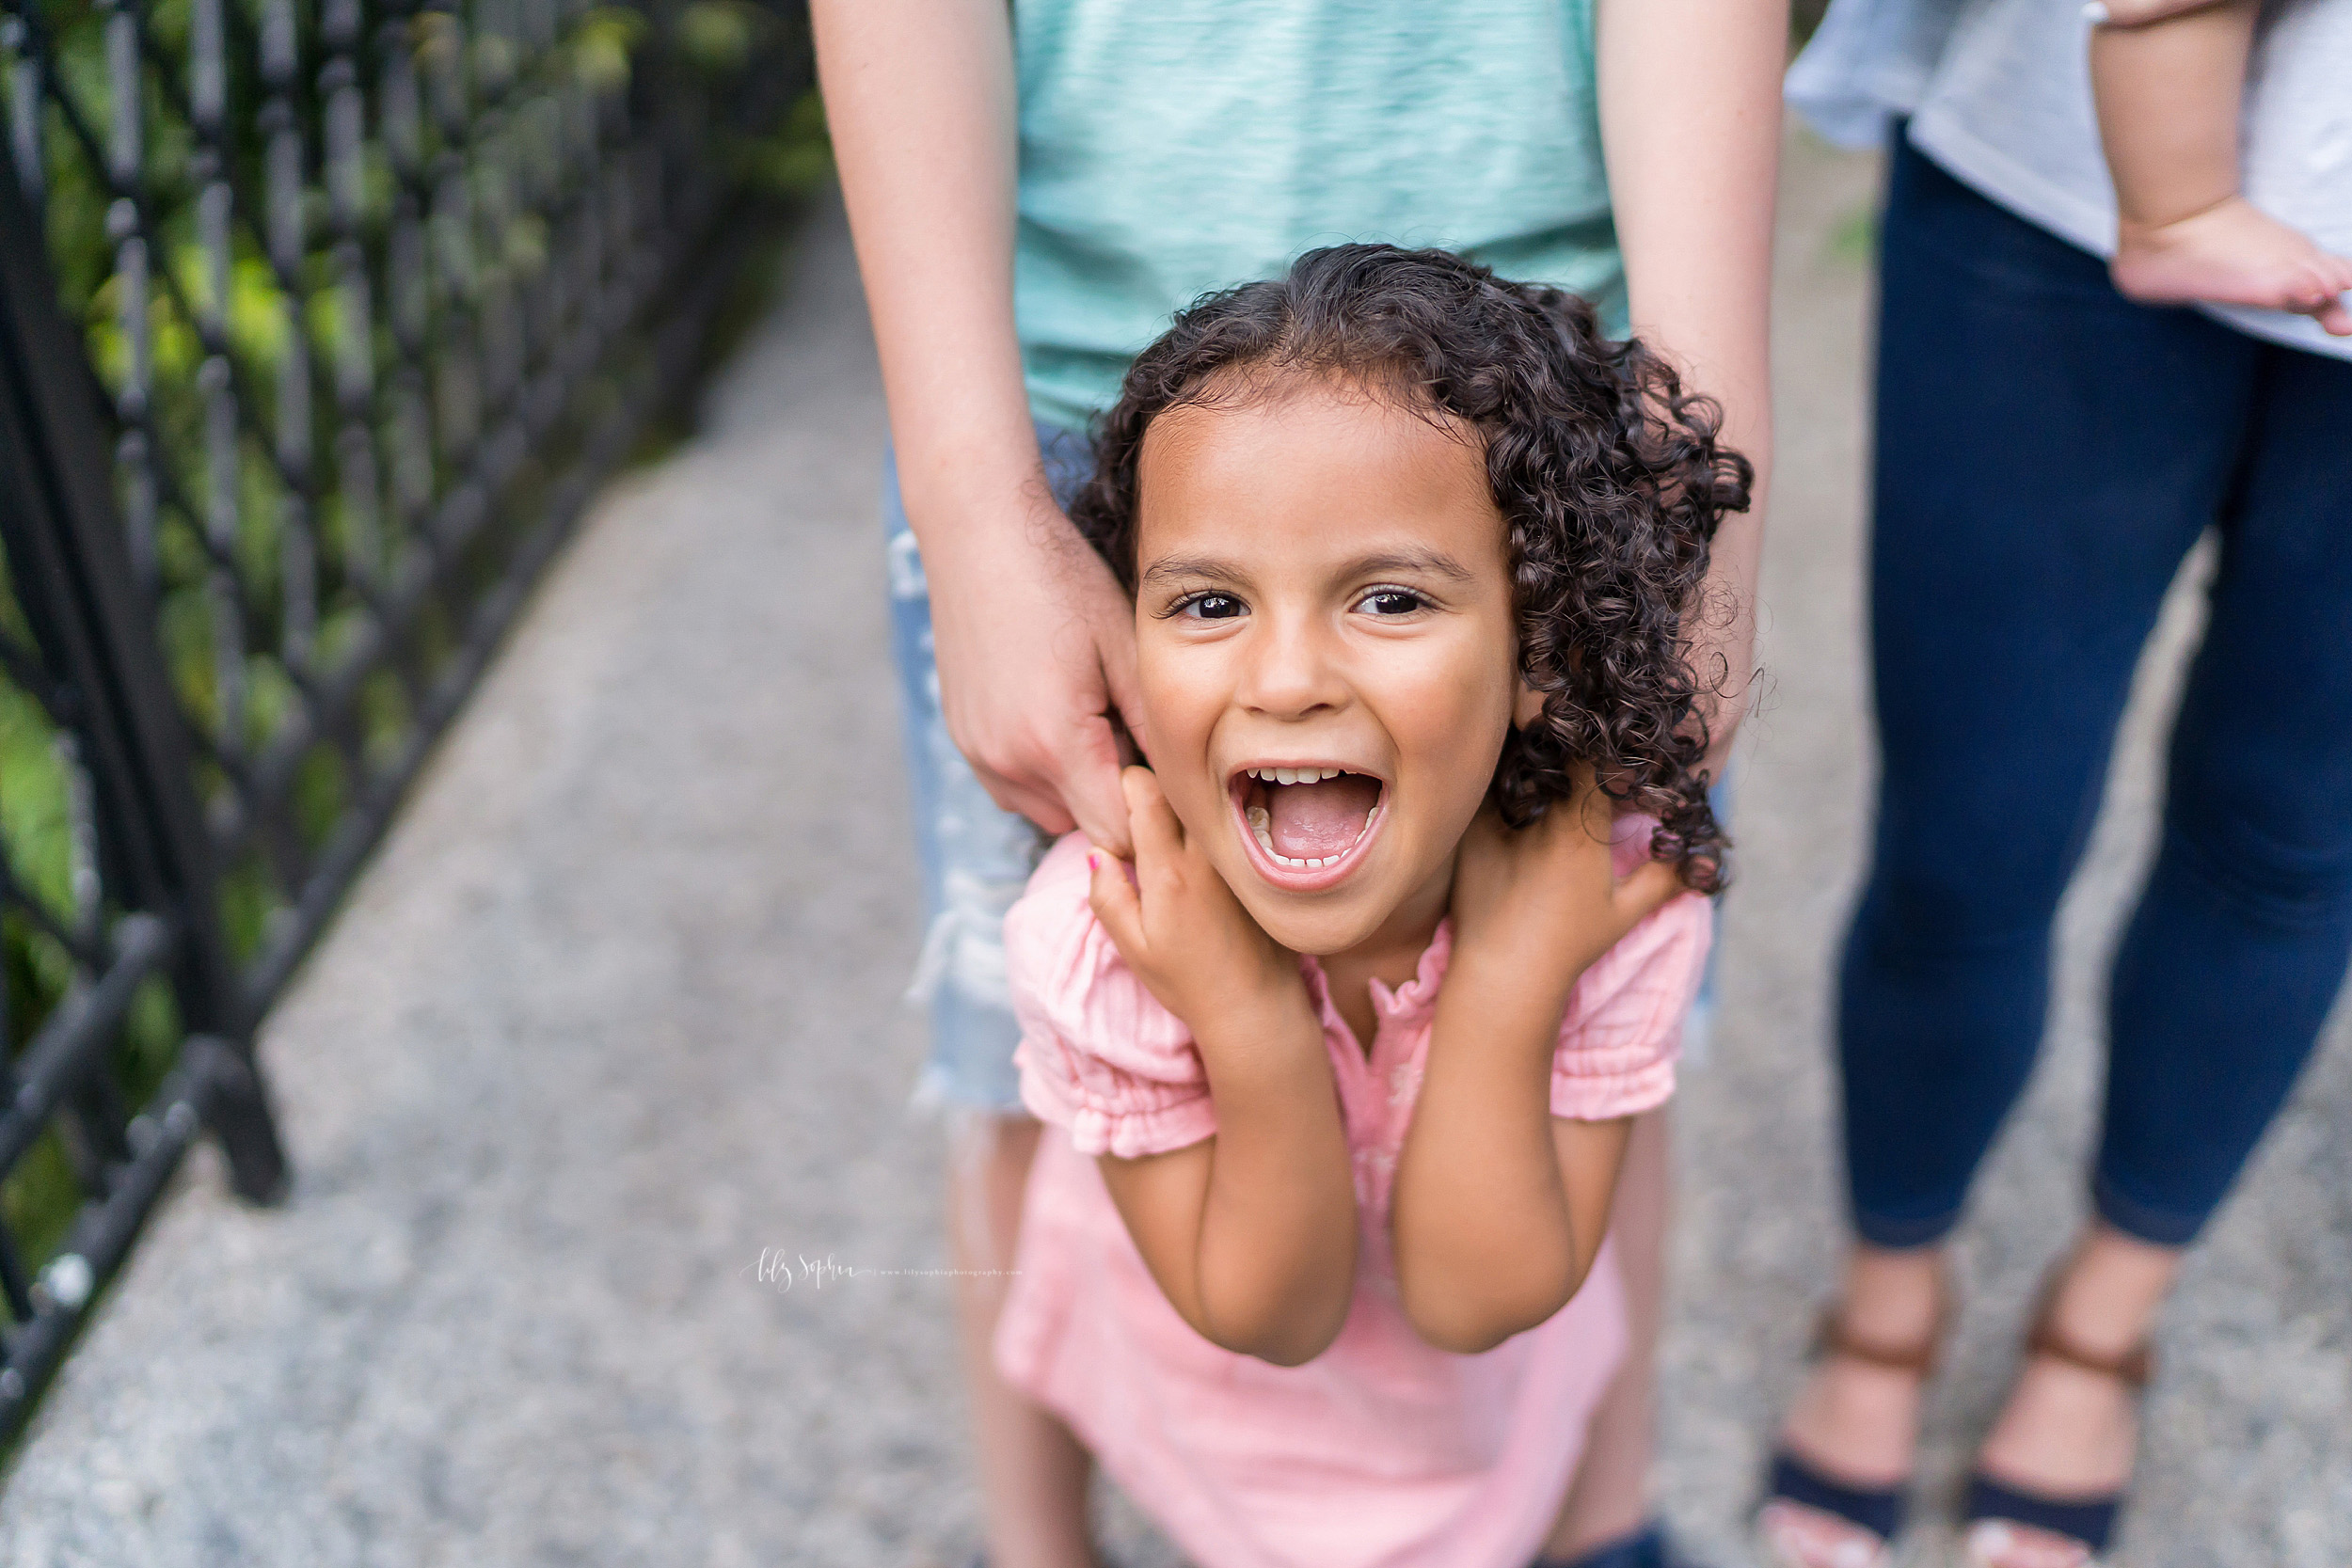  Photo of a laughing young girl in an Atlanta garden. The little girl has her hands up by her shoulders. She is holding her older brother’s fingers as they stand on a bridge. The little girl has her mouth open.  Her mother is standing next to her bro